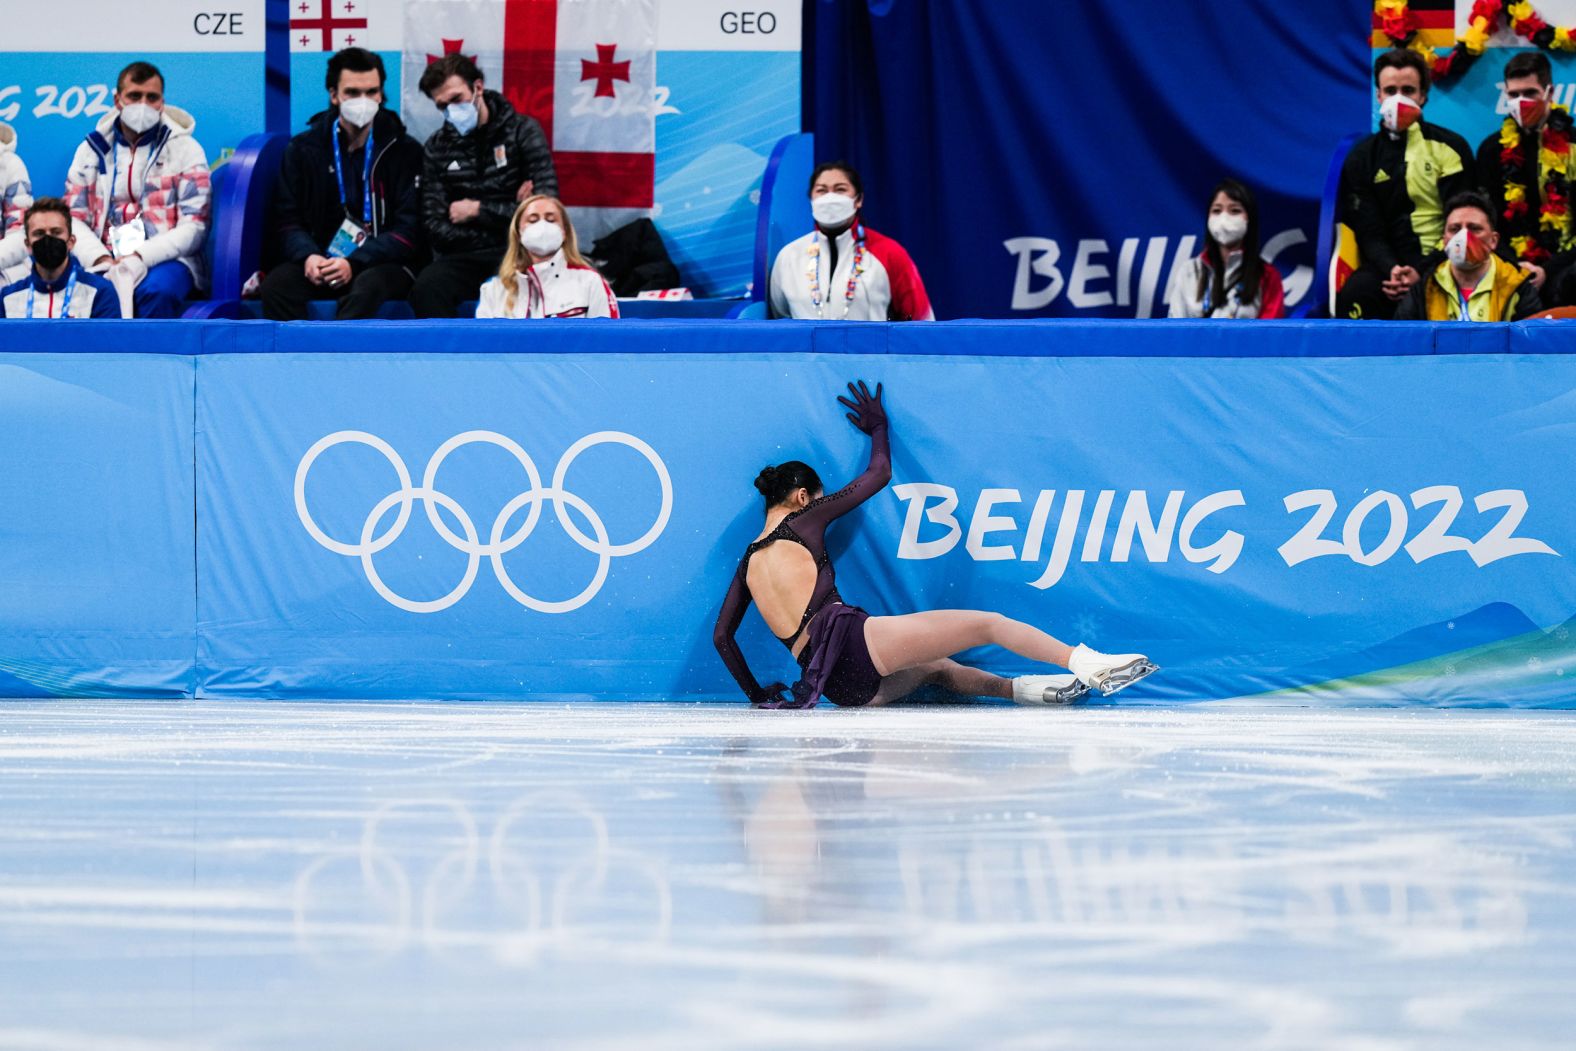 China's Zhu Yi falls during her short program while competing in the team figure skating event on February 6. After finishing last, the US-born skater faced a <a href="index.php?page=&url=https%3A%2F%2Fwww.cnn.com%2F2022%2F02%2F06%2Fsport%2Fus-born-figure-skater-beverly-zhu-yi-china-olympic-intl-hnk%2Findex.html" target="_blank">firestorm of criticism</a> on Chinese social media.